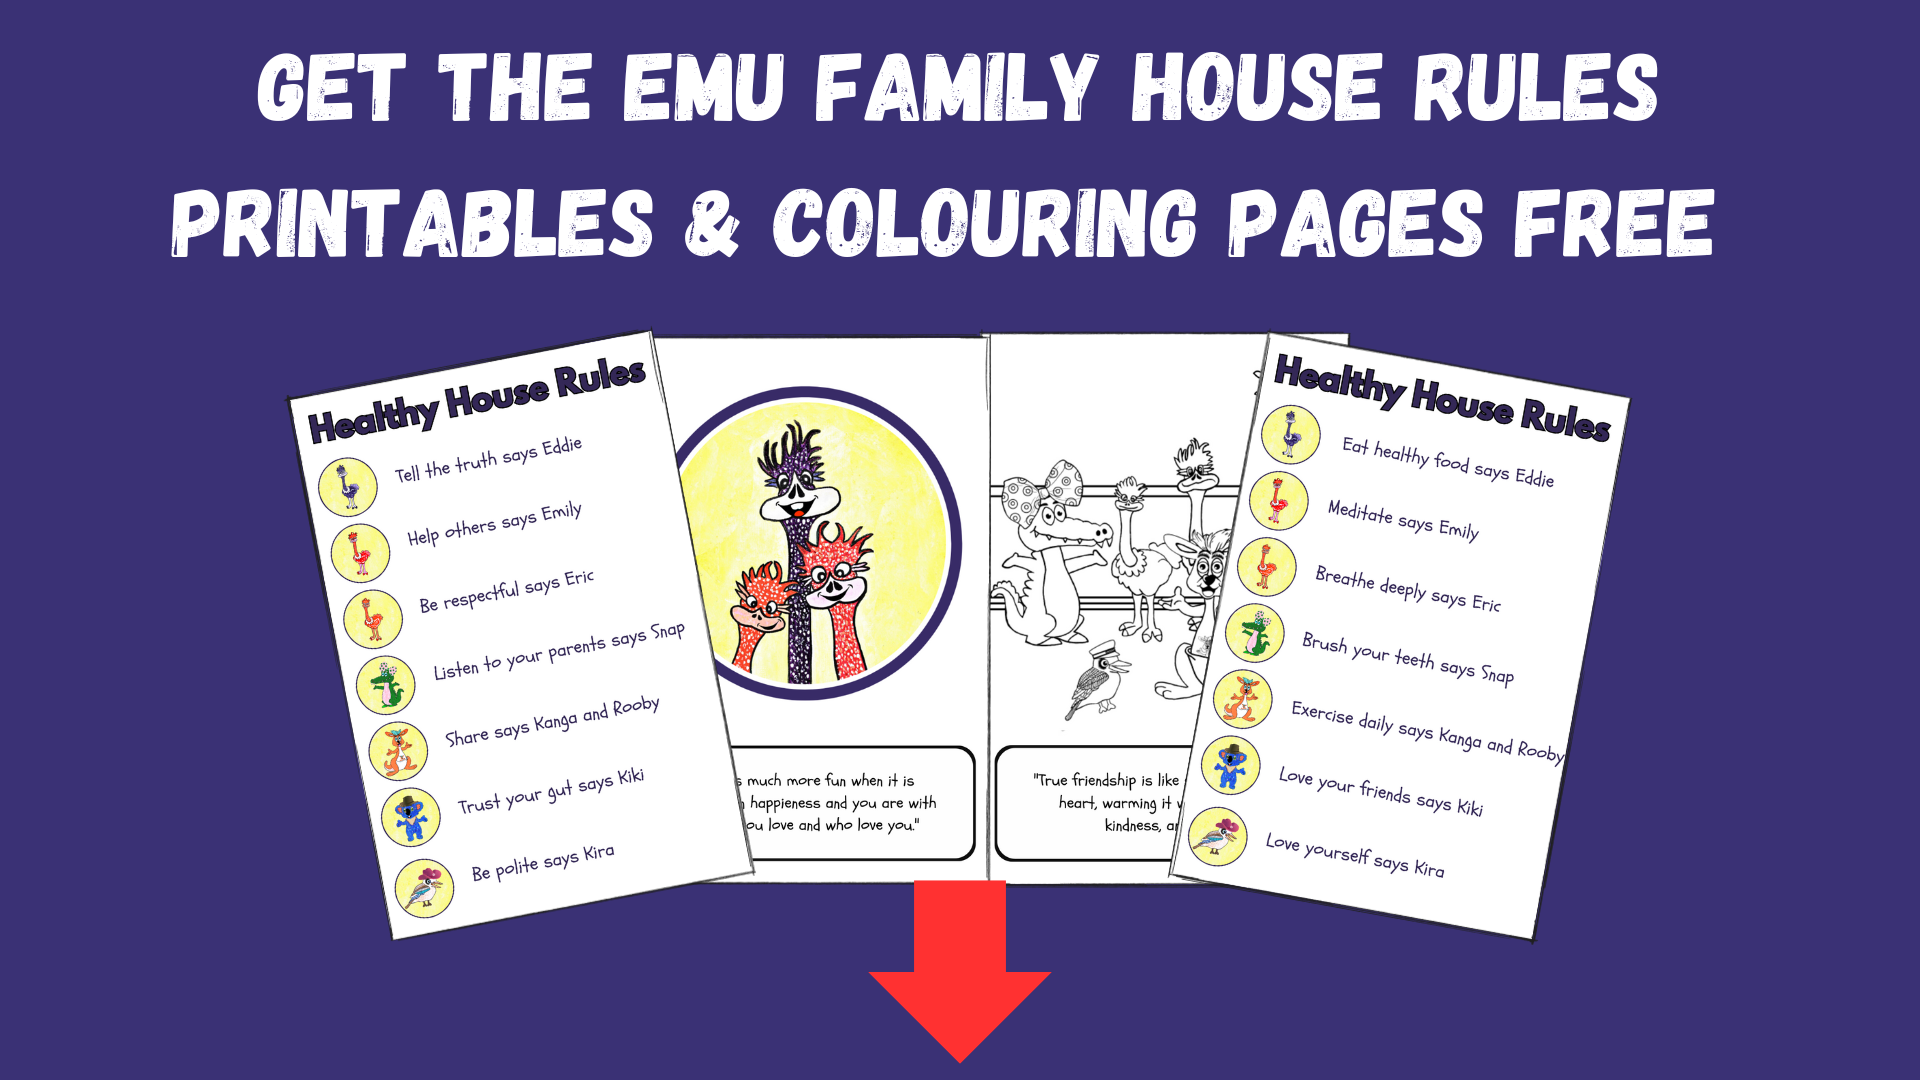 The Emu Family House Rules Printables & Colouring Pages (1)